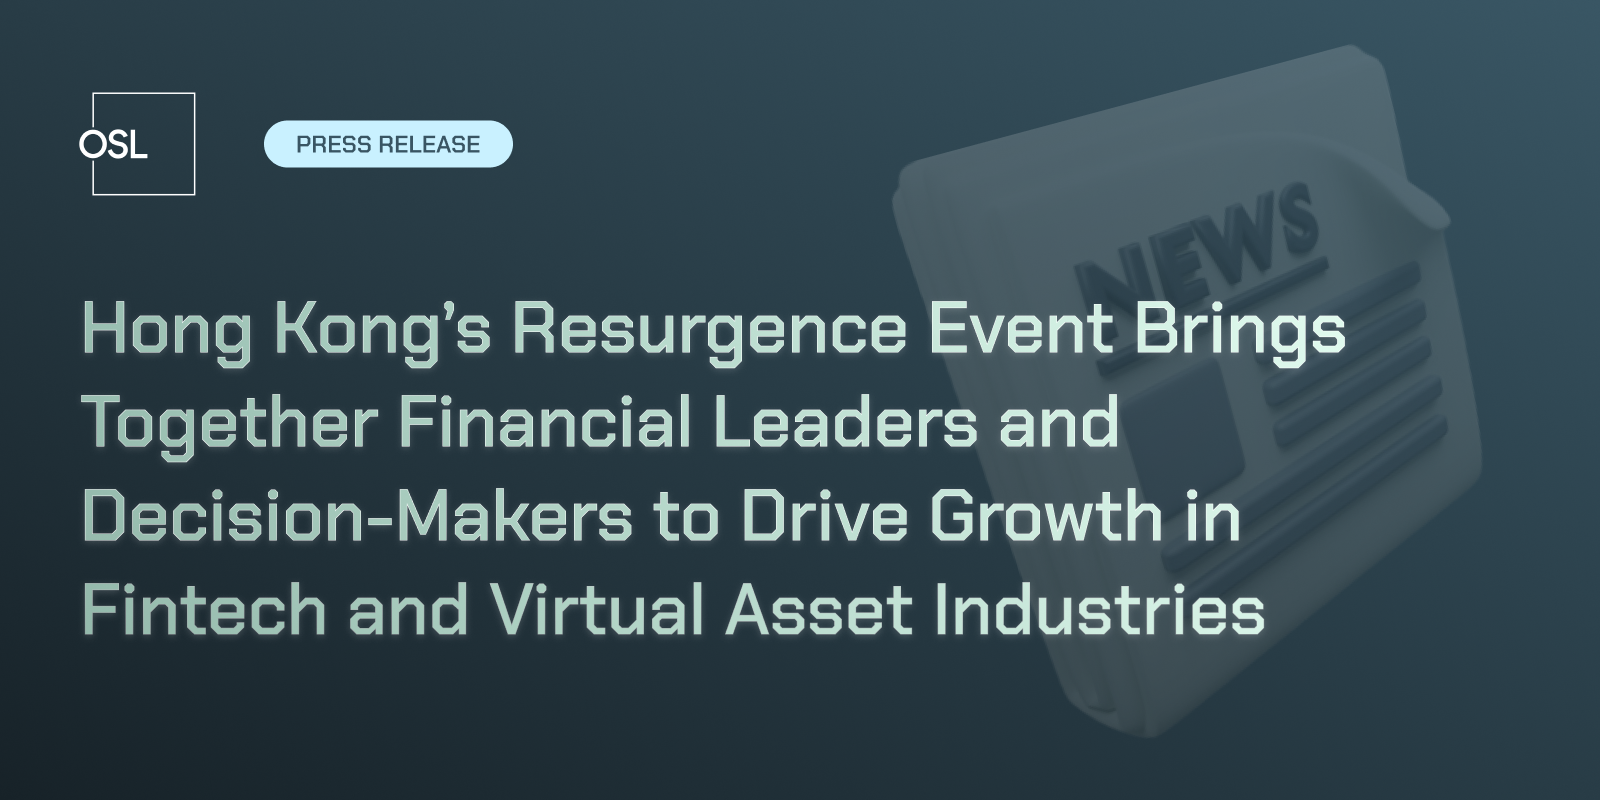 Hong Kong’s Resurgence Event Brings Together Financial Leaders and Decision-Makers to Drive Growth in Fintech and Virtual Asset Industries